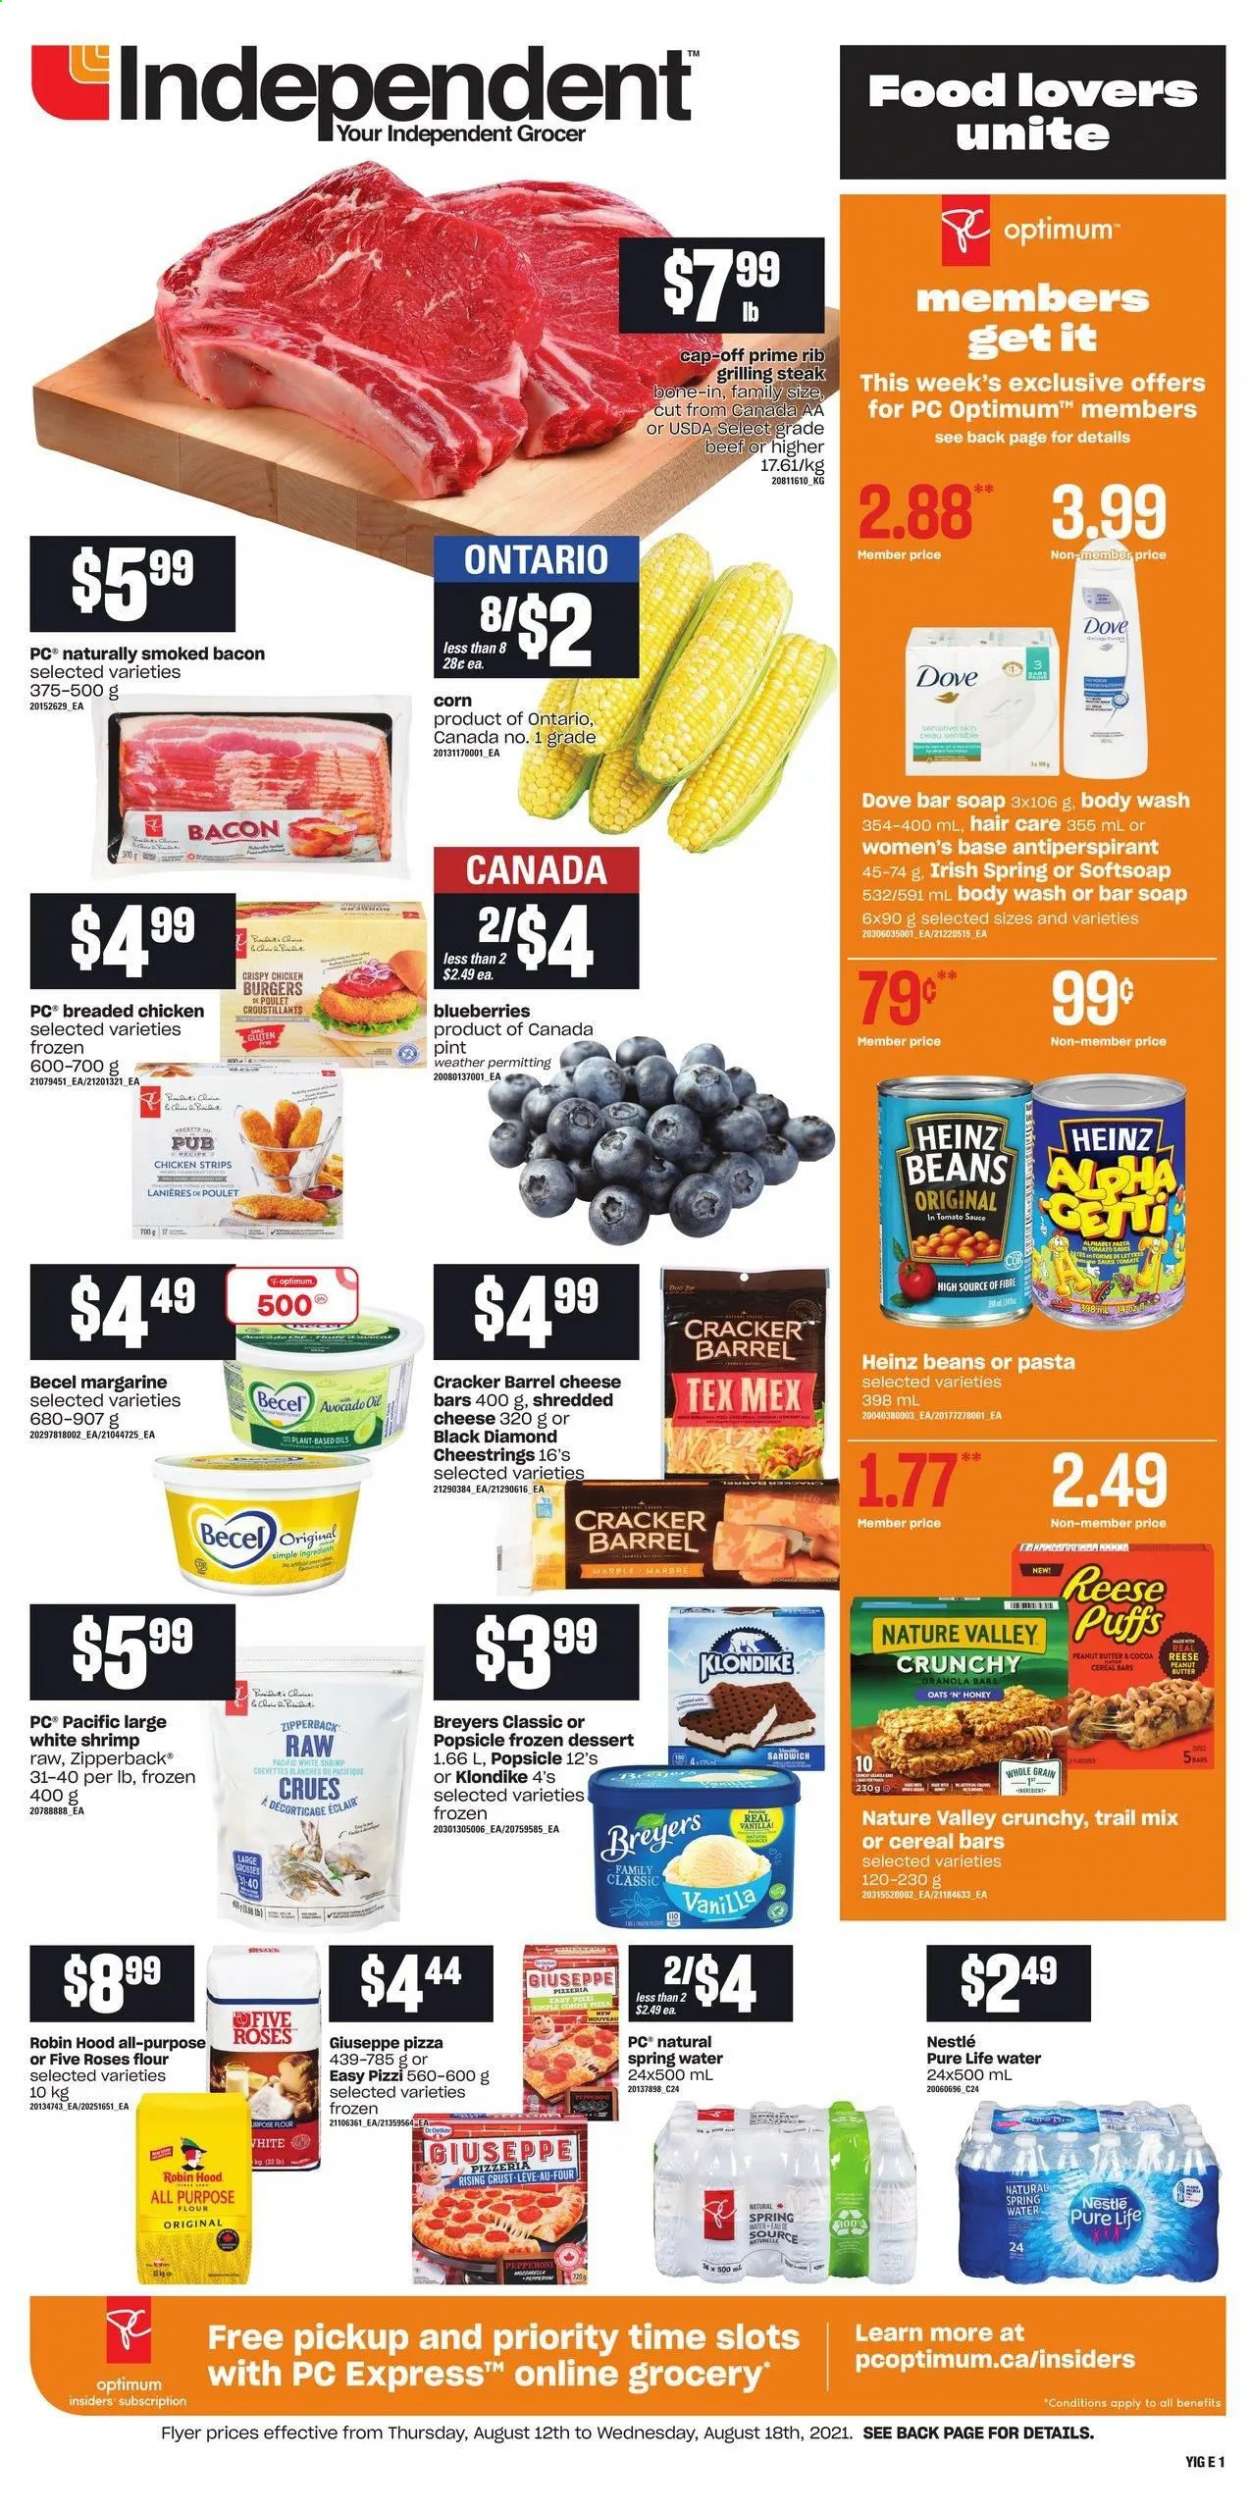 thumbnail - Independent Flyer - August 12, 2021 - August 18, 2021 - Sales products - puffs, beans, corn, blueberries, shrimps, pizza, sandwich, hamburger, fried chicken, bacon, shredded cheese, string cheese, margarine, strips, chicken strips, cereal bar, crackers, cocoa, flour, oats, Heinz, Nature Valley, avocado oil, oil, honey, peanut butter, trail mix, spring water, Pure Life Water, body wash, Softsoap, soap bar, soap, anti-perspirant, Optimum, Nestlé, steak. Page 1.